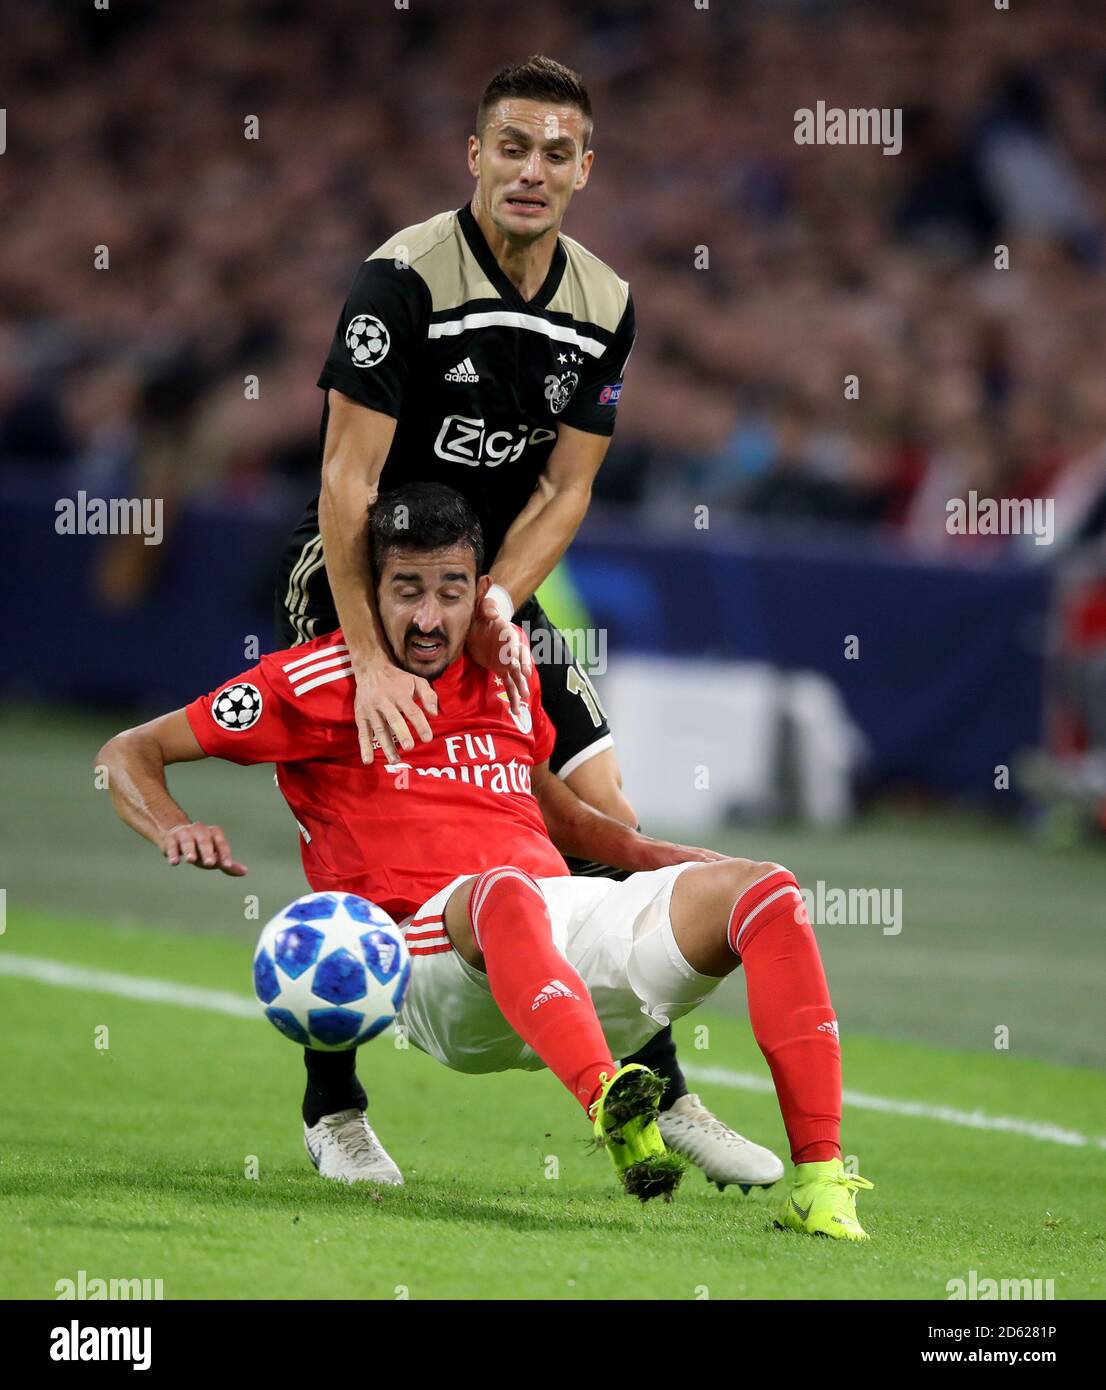 Ajax's Dusan Tadic (top) and Benfica's Andre Almeida battle for the ball Stock Photo